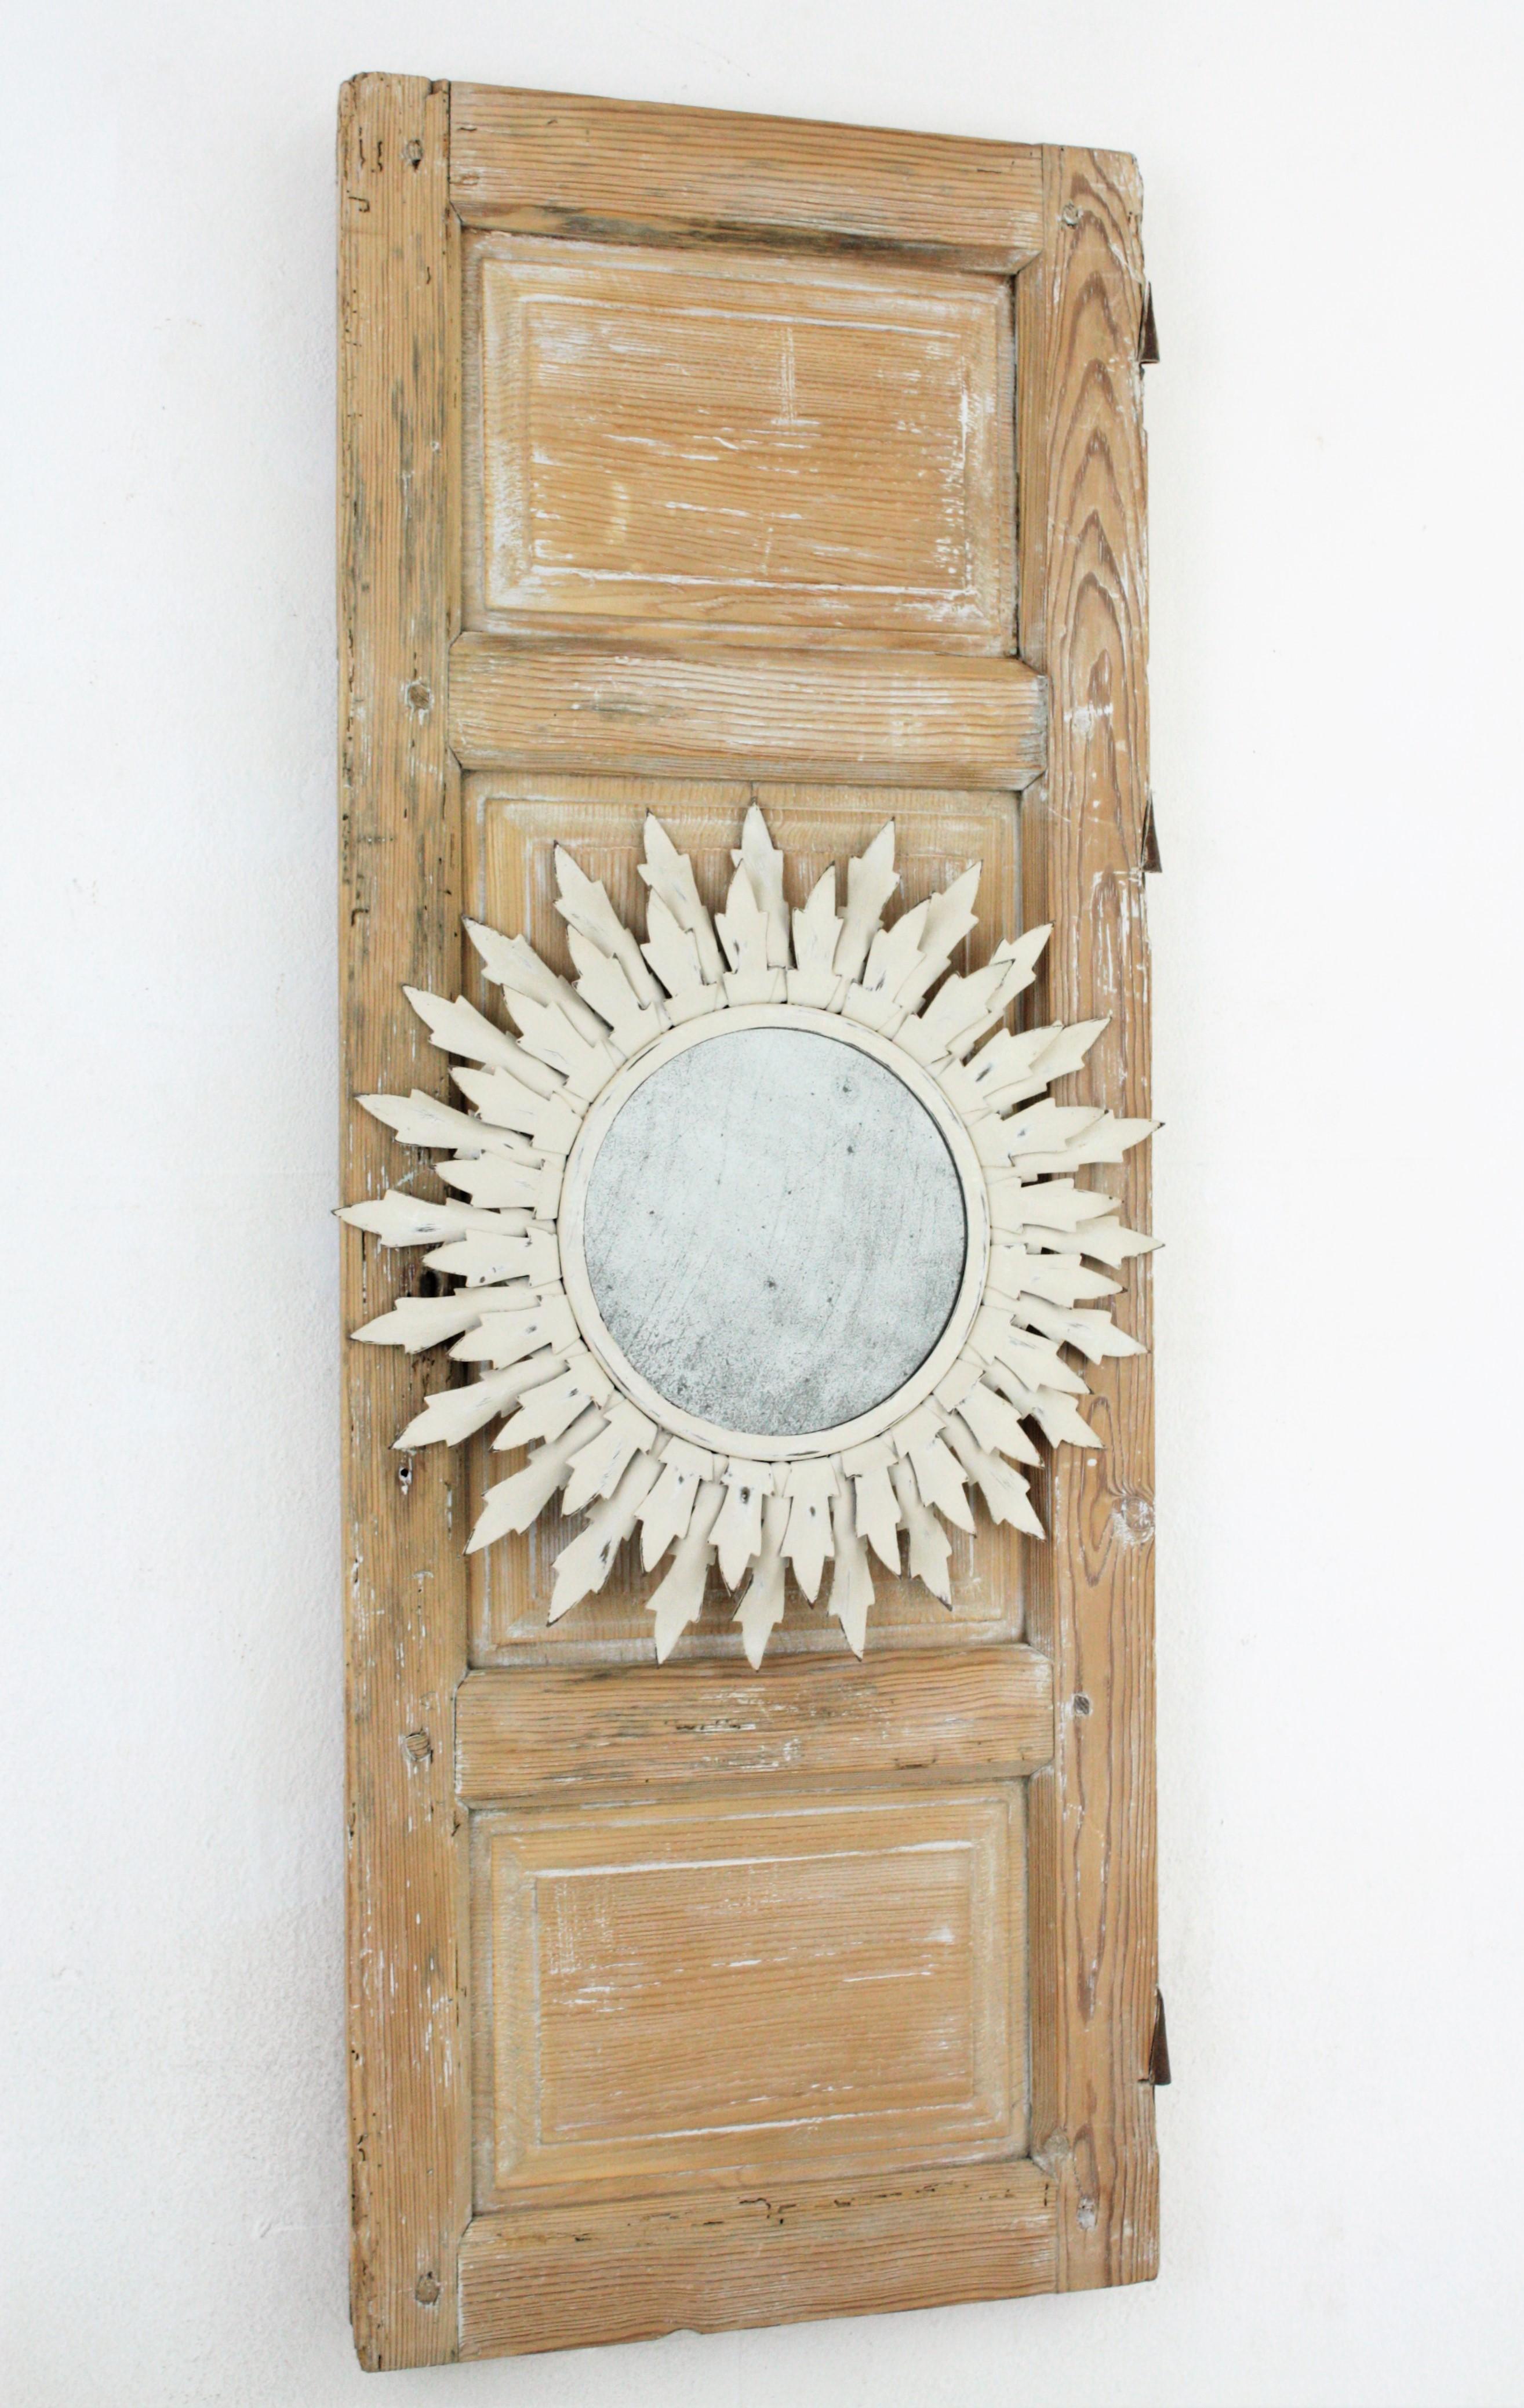 Eye-catching sunburst mirror in white patina on a wooden antique door displayed as a Trumeau mirror.
This wall mirror features a white painted sunburst mirror from the 1960s framed on a Spanish 18th century door. The door has a washed effect